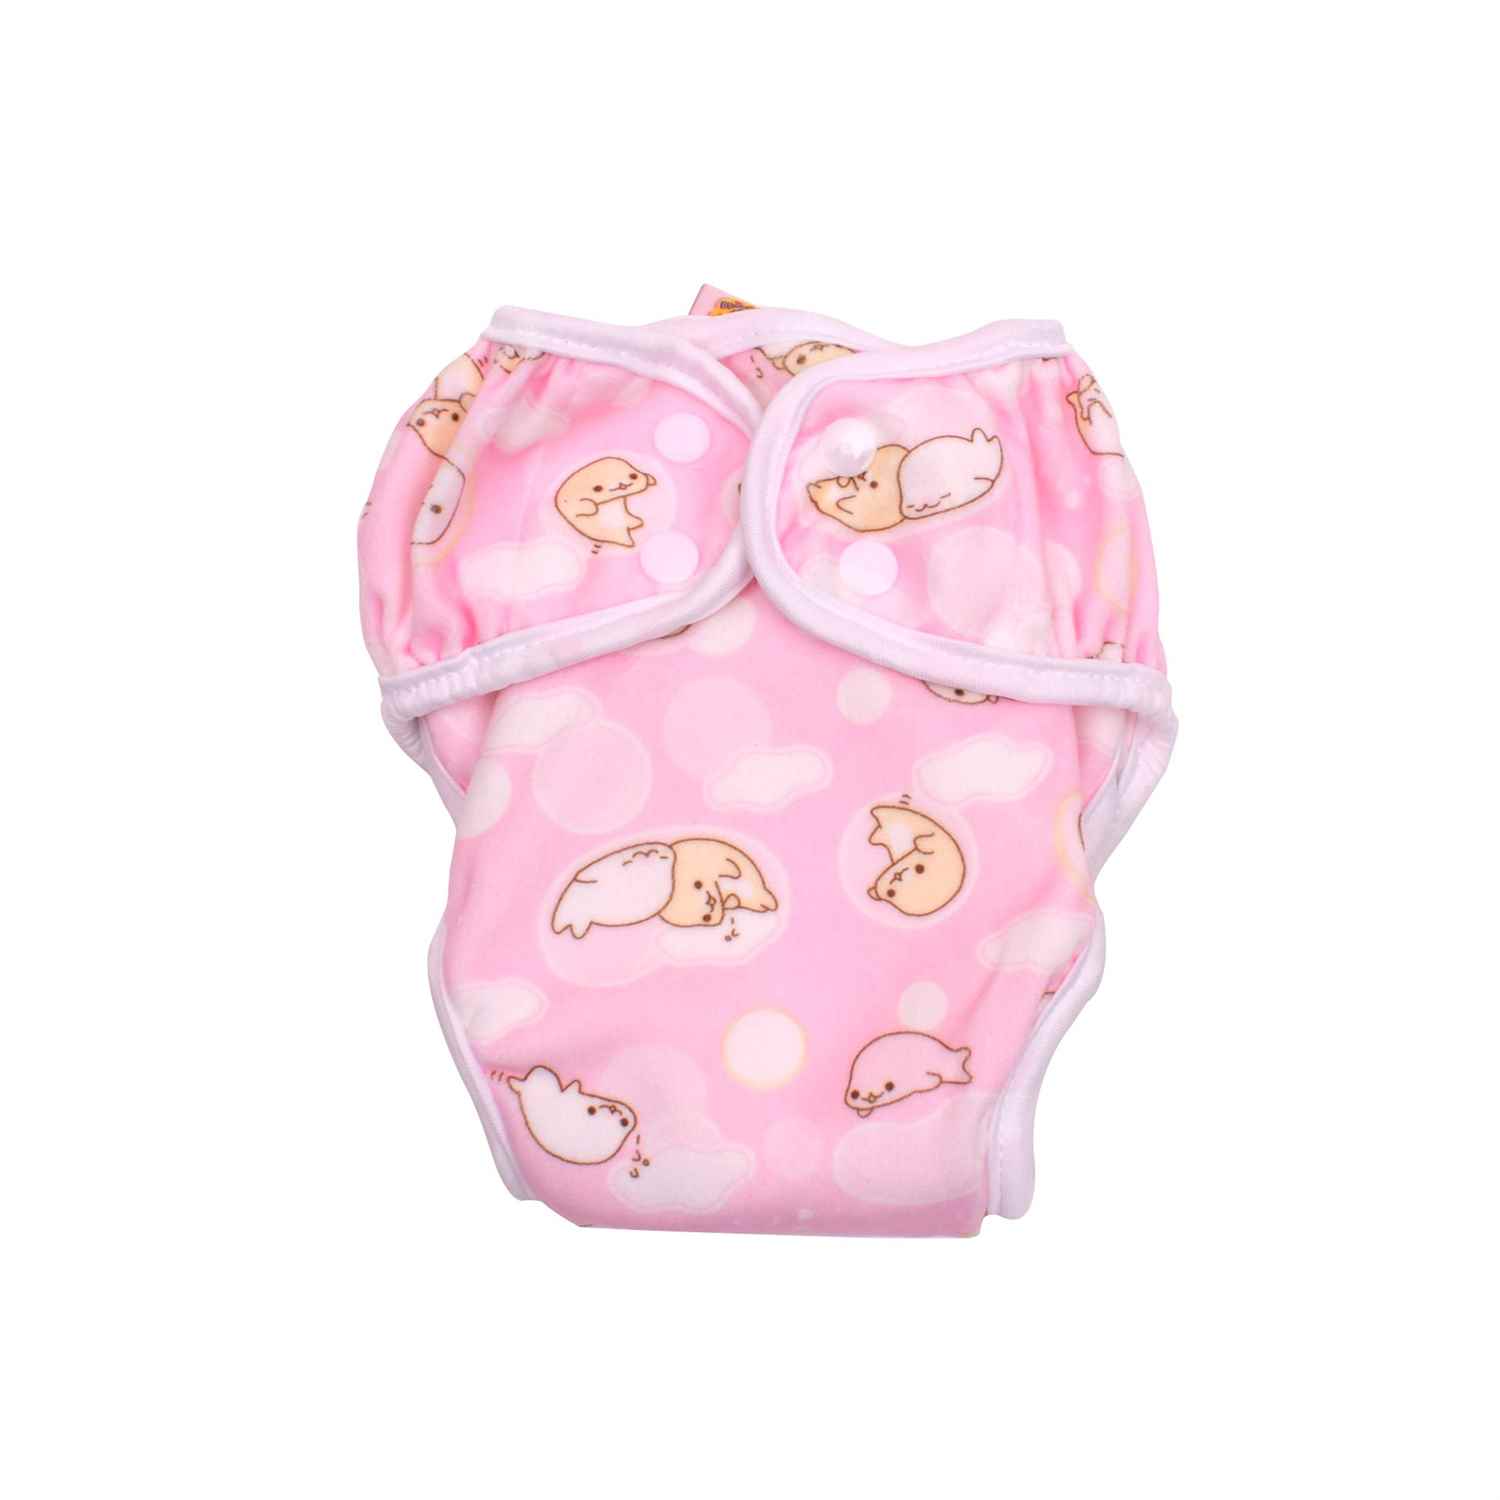 PAW PAW Baby Reusable Fabric Diaper with Pad, Size M (5-9kg)-Pink